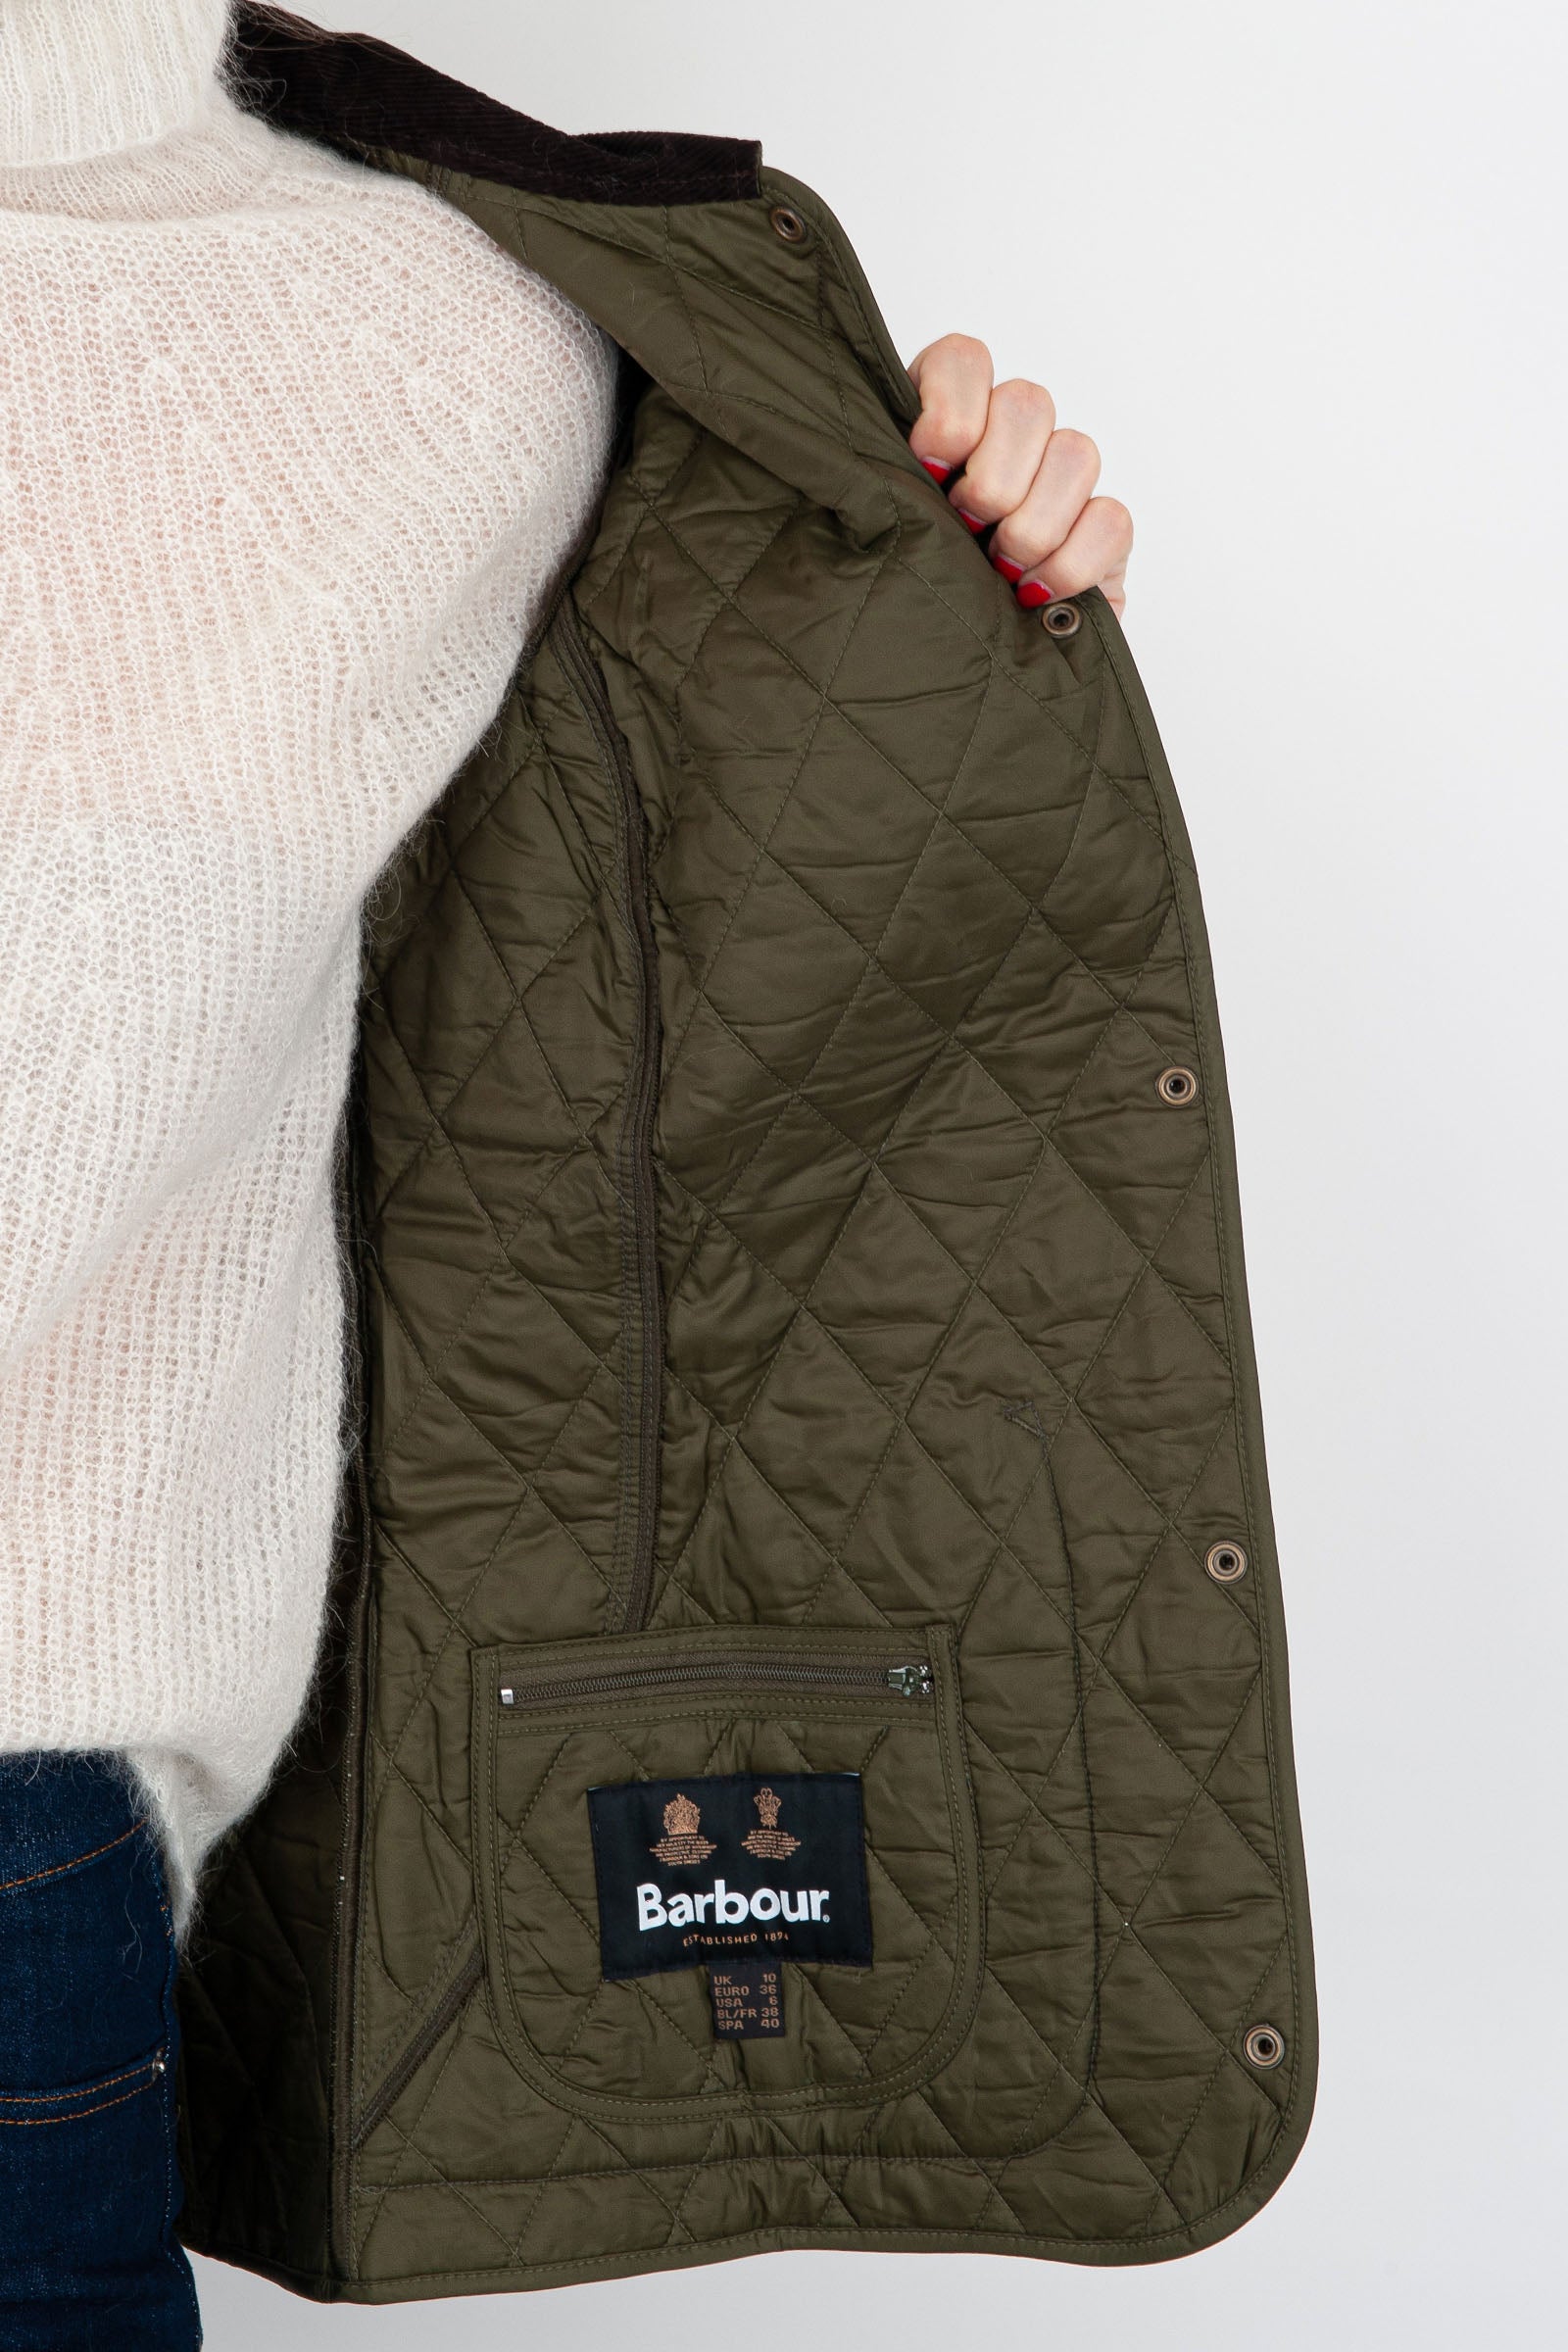 Barbour Annandale Quilted Jacket in Synthetic Olive Green - 5